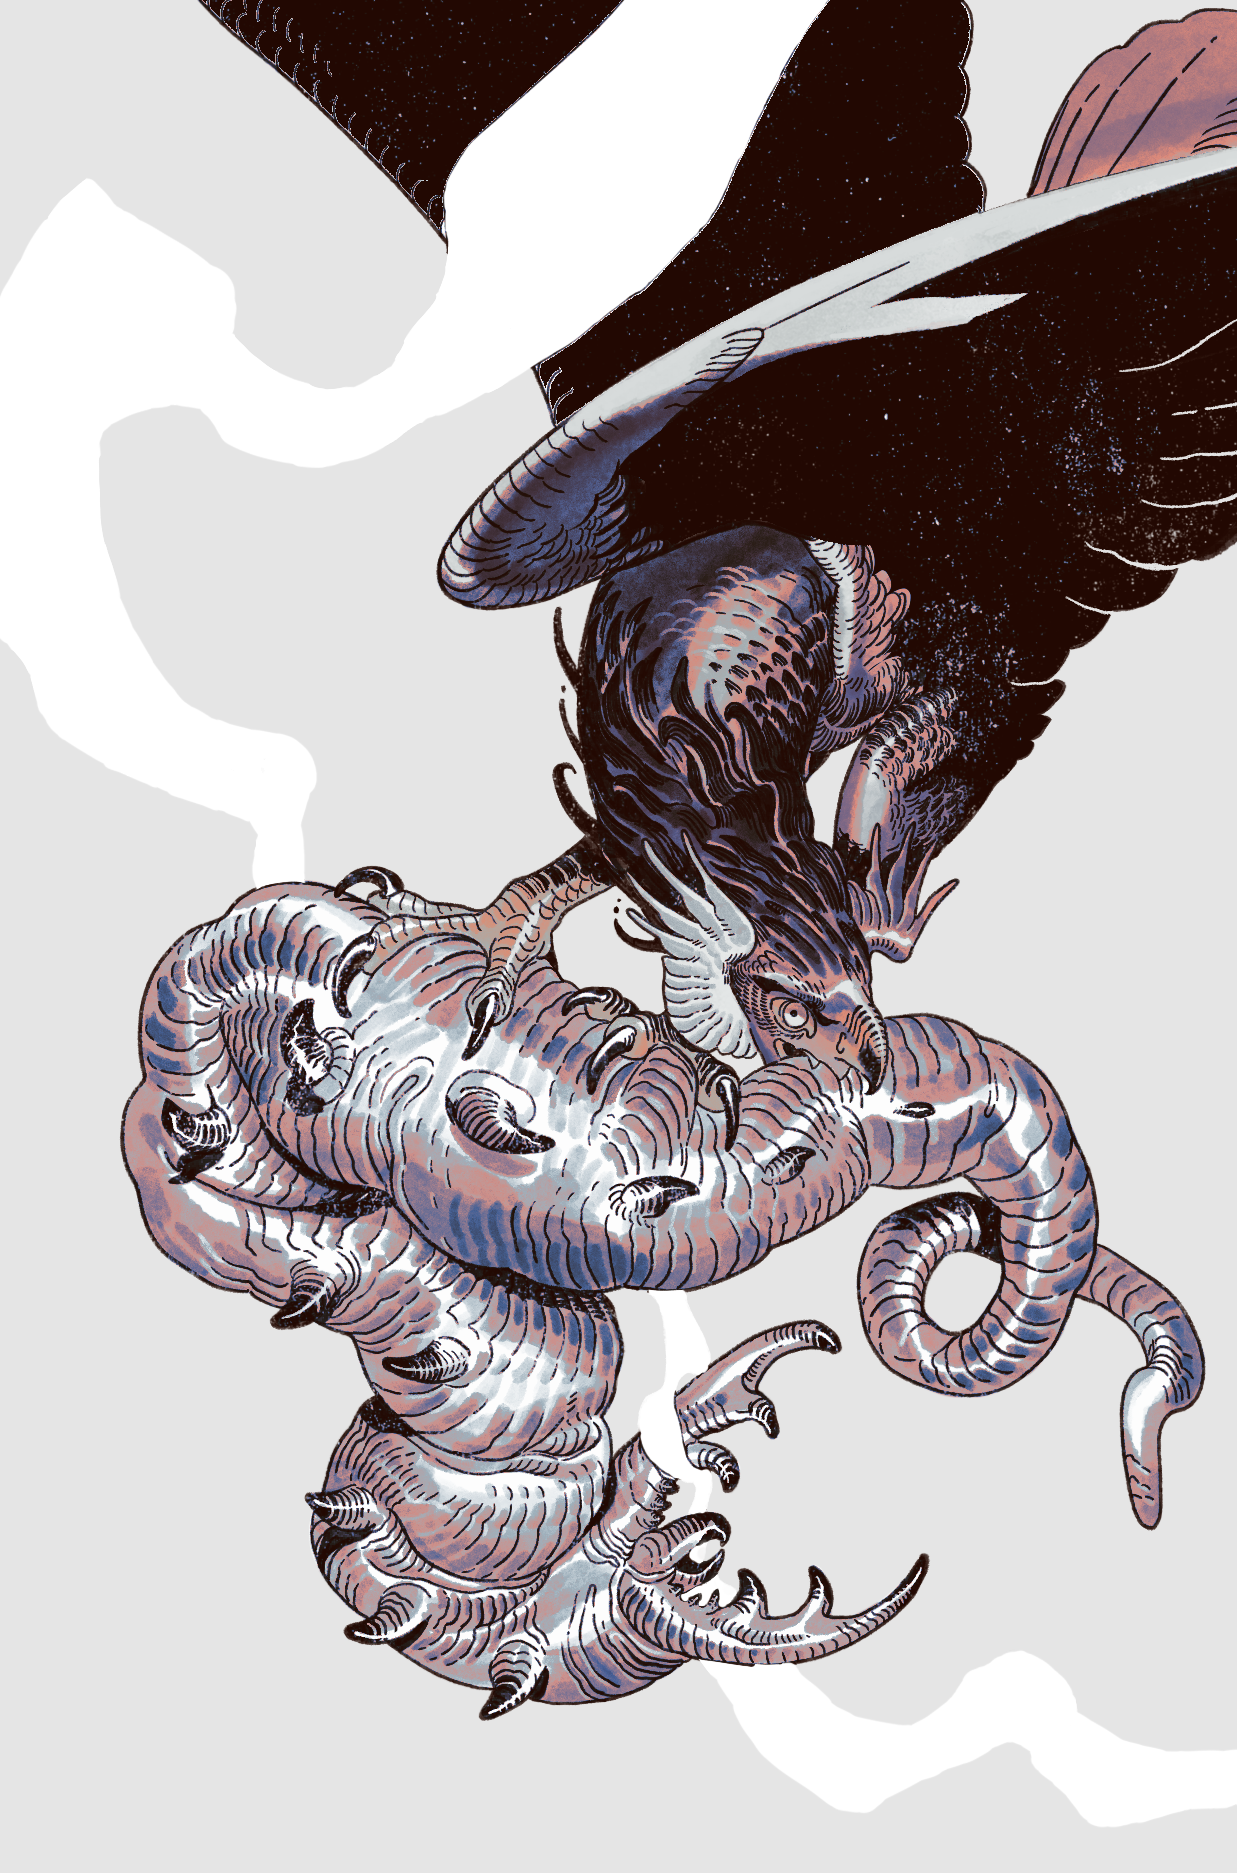 Cropped art showing a harpy with a large hooked beak attacking a creature resembling a bobbit worm. The harpy clings onto it in mid-air with his talons. A twisting skein of smoke surrounds them.